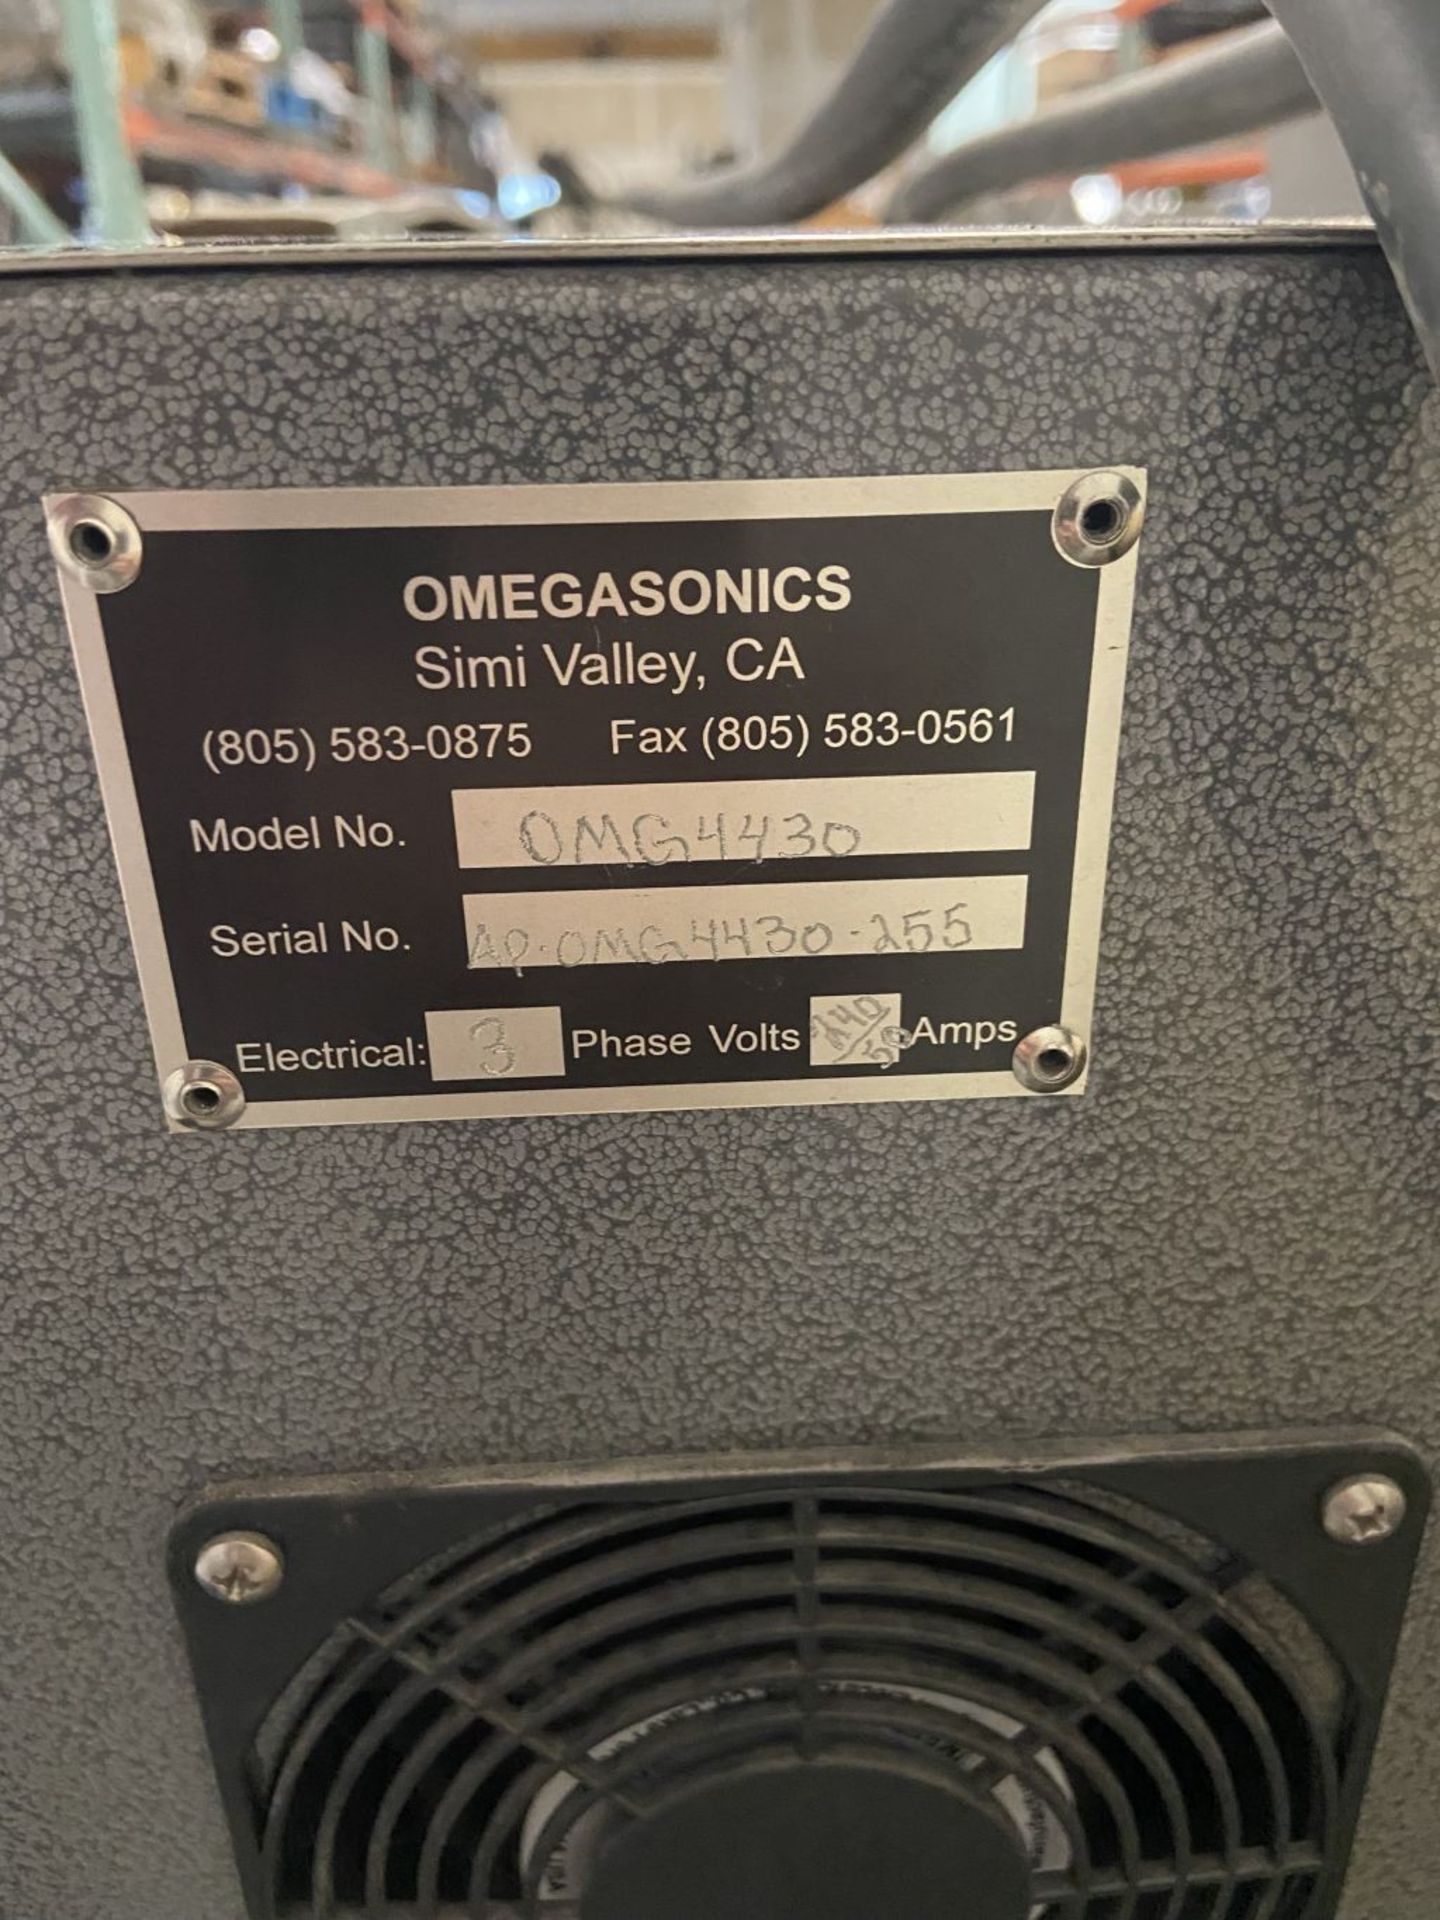 Omegasonics Parts Washer. Model: OMG4430, Serial: APOMG4430-255, Age: Purchased in 2015, Power - Image 6 of 7